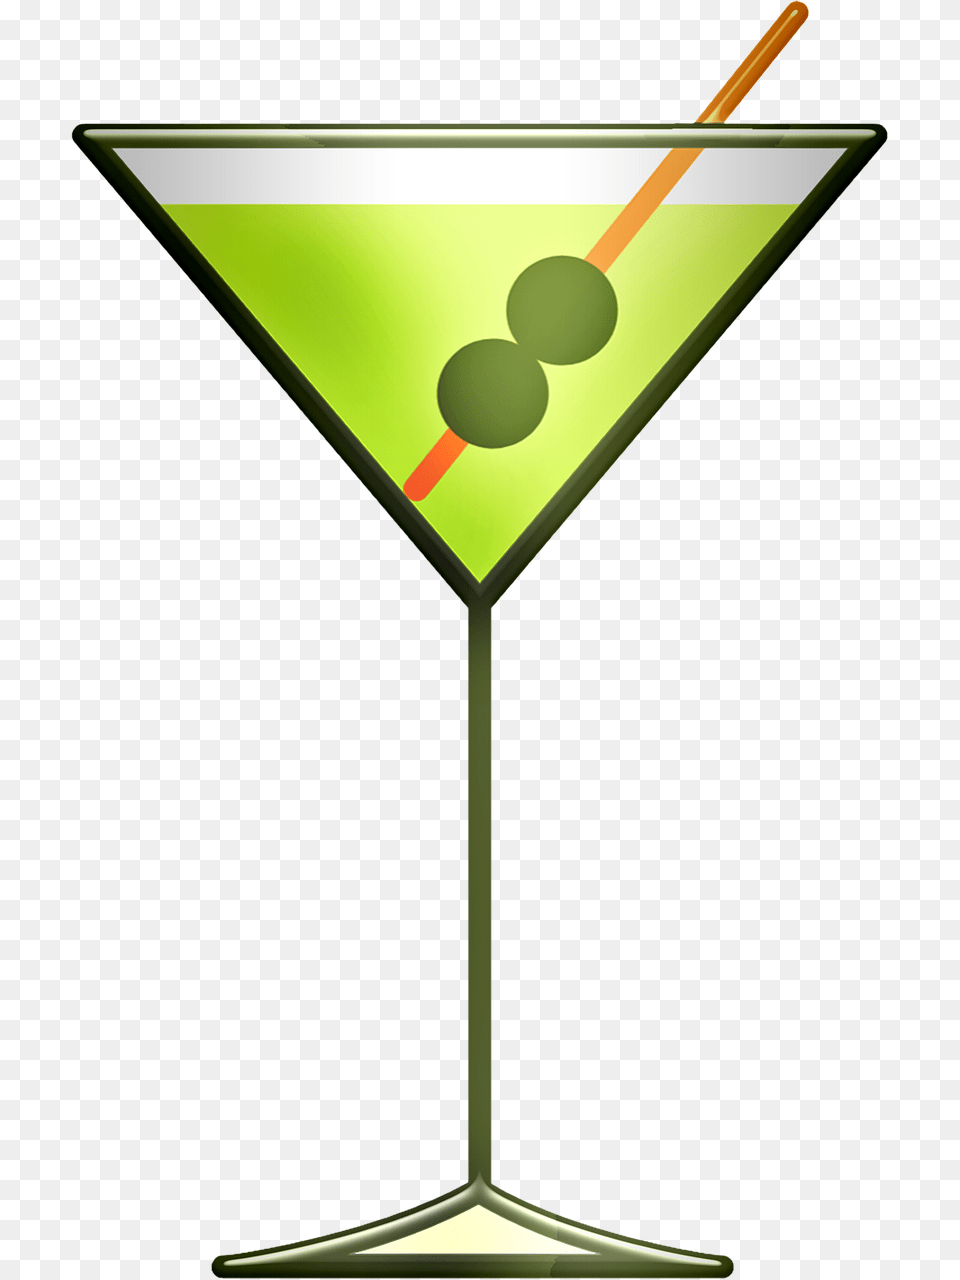 Ymca Ipoh The Symbol Clipart Download Young Men39s Christian Association Logo, Alcohol, Beverage, Cocktail, Martini Png Image